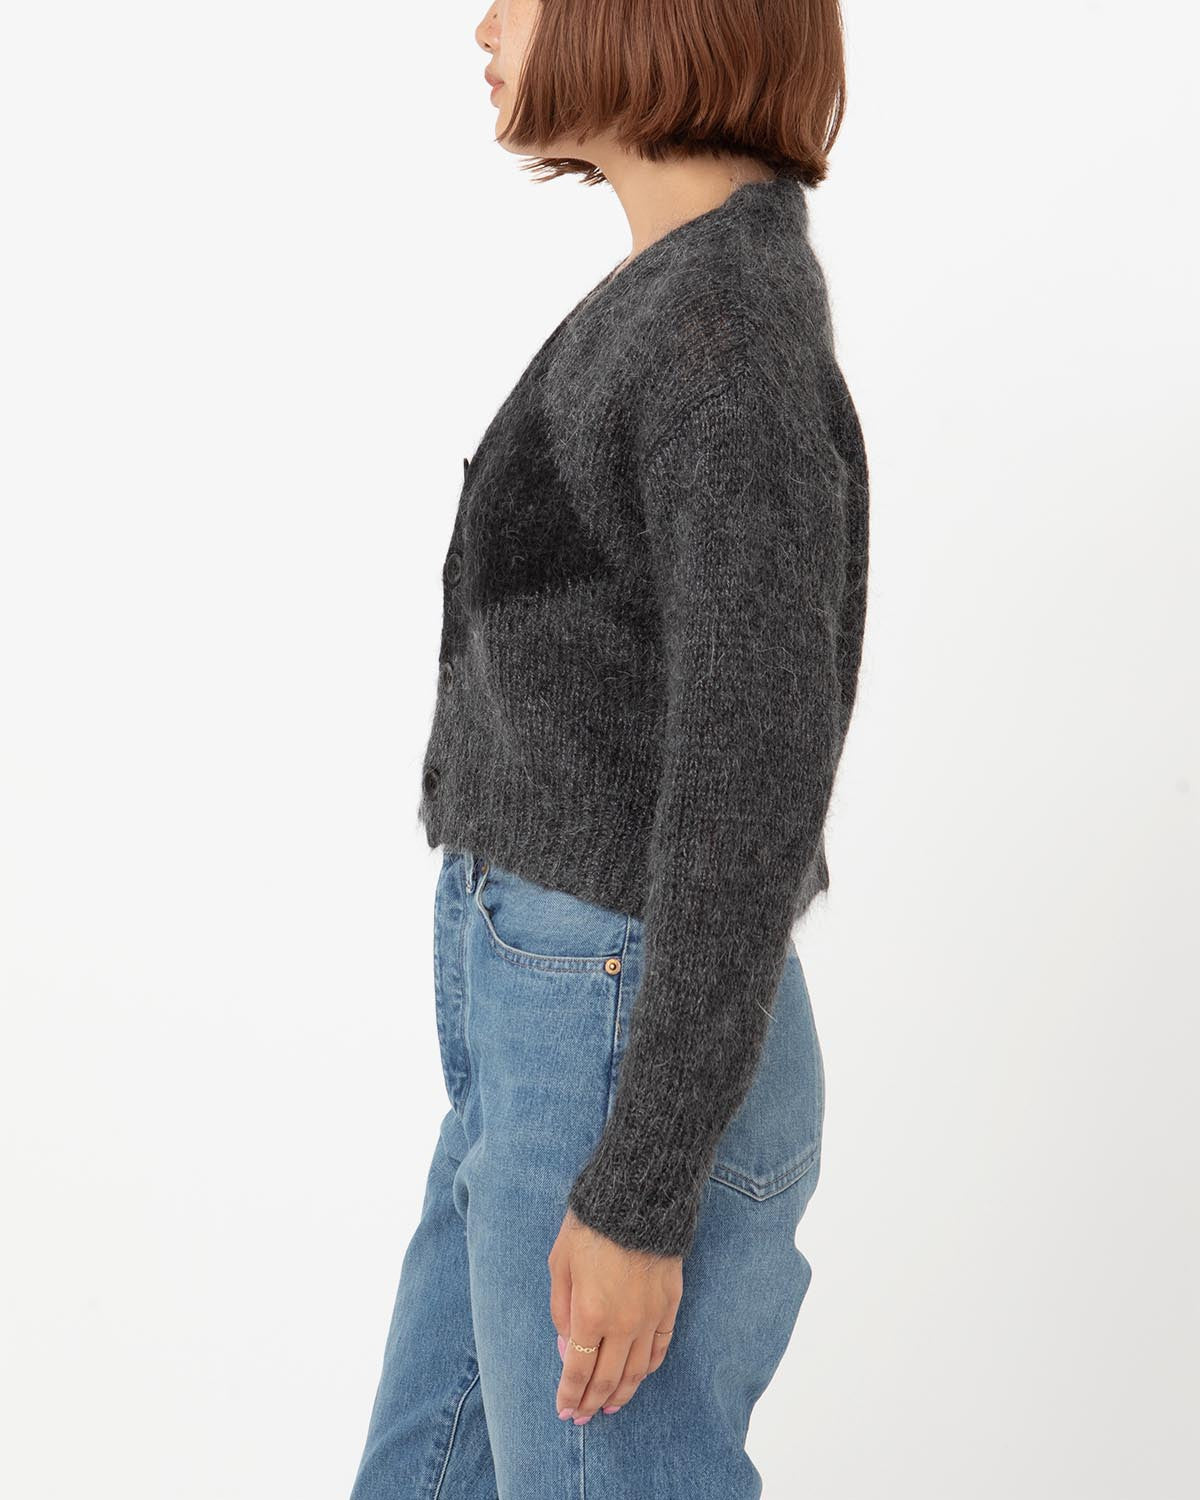 HAND KNITTED MOHAIR CARDIGAN (WOMEN'S)